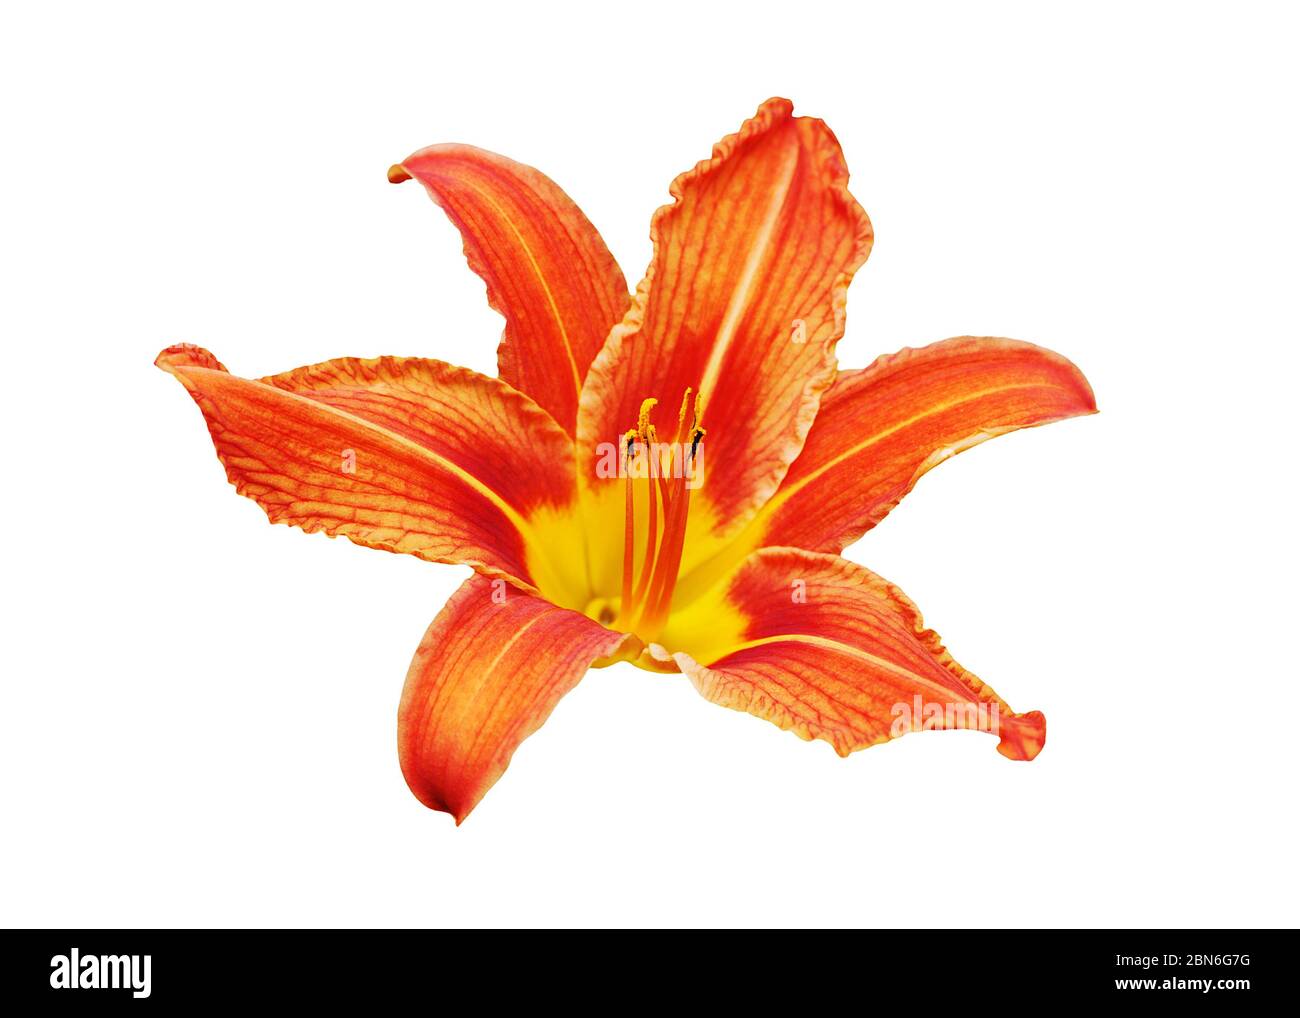 Orange day lily flower white background isolated close up, red and yellow petals lilly, bright beautiful hippeastrum macro, colorful amaryllis flower Stock Photo